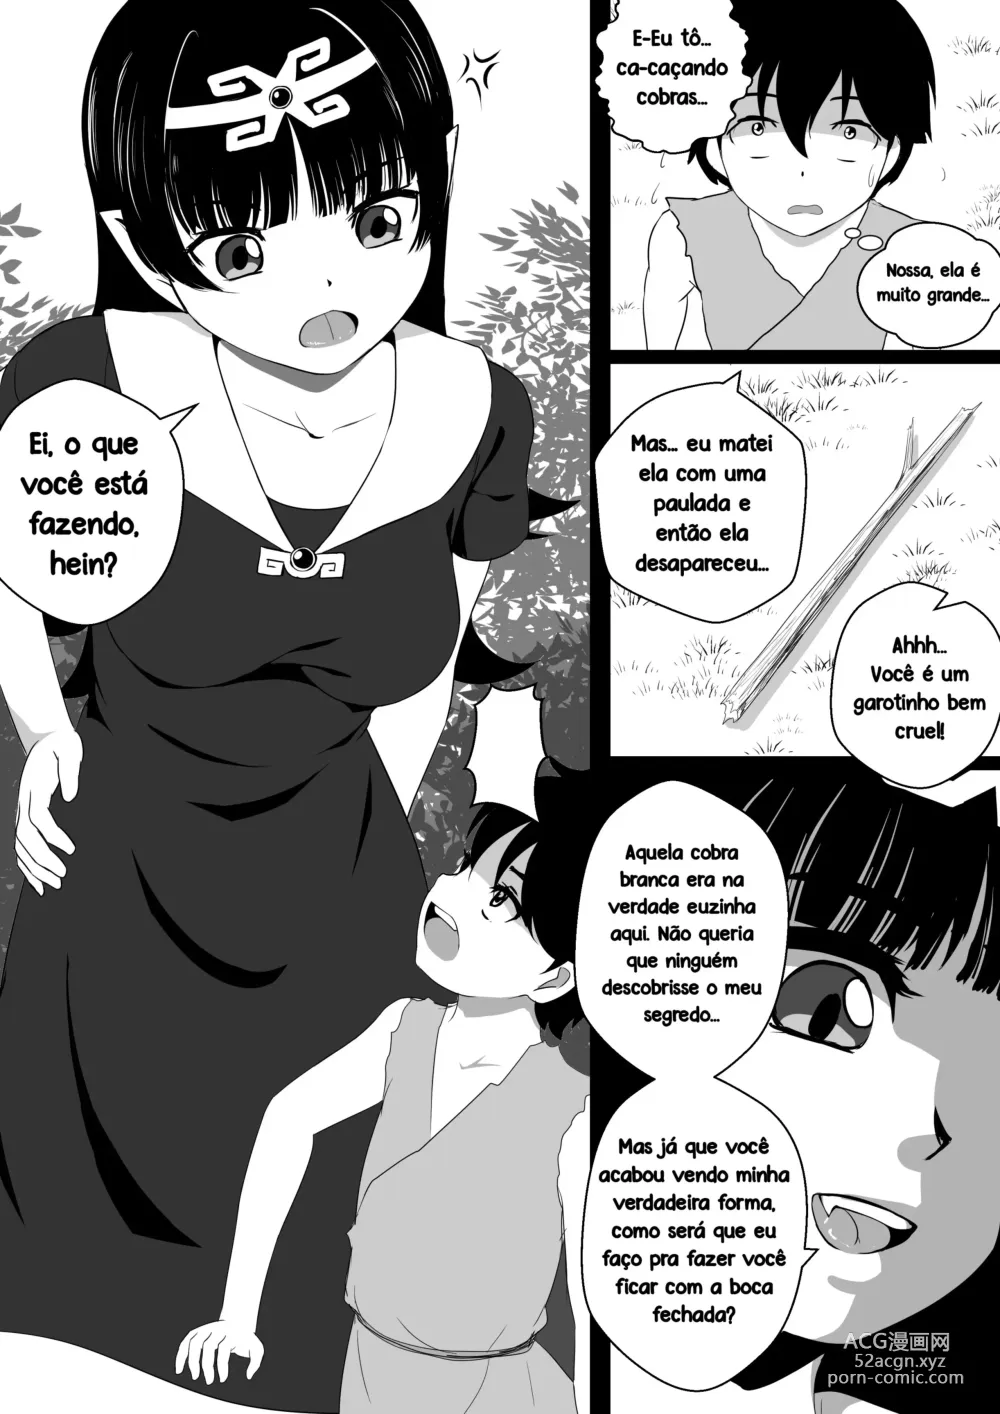 Page 5 of doujinshi Monstergirl Song - Snake Chapter [CG17] PT-BR